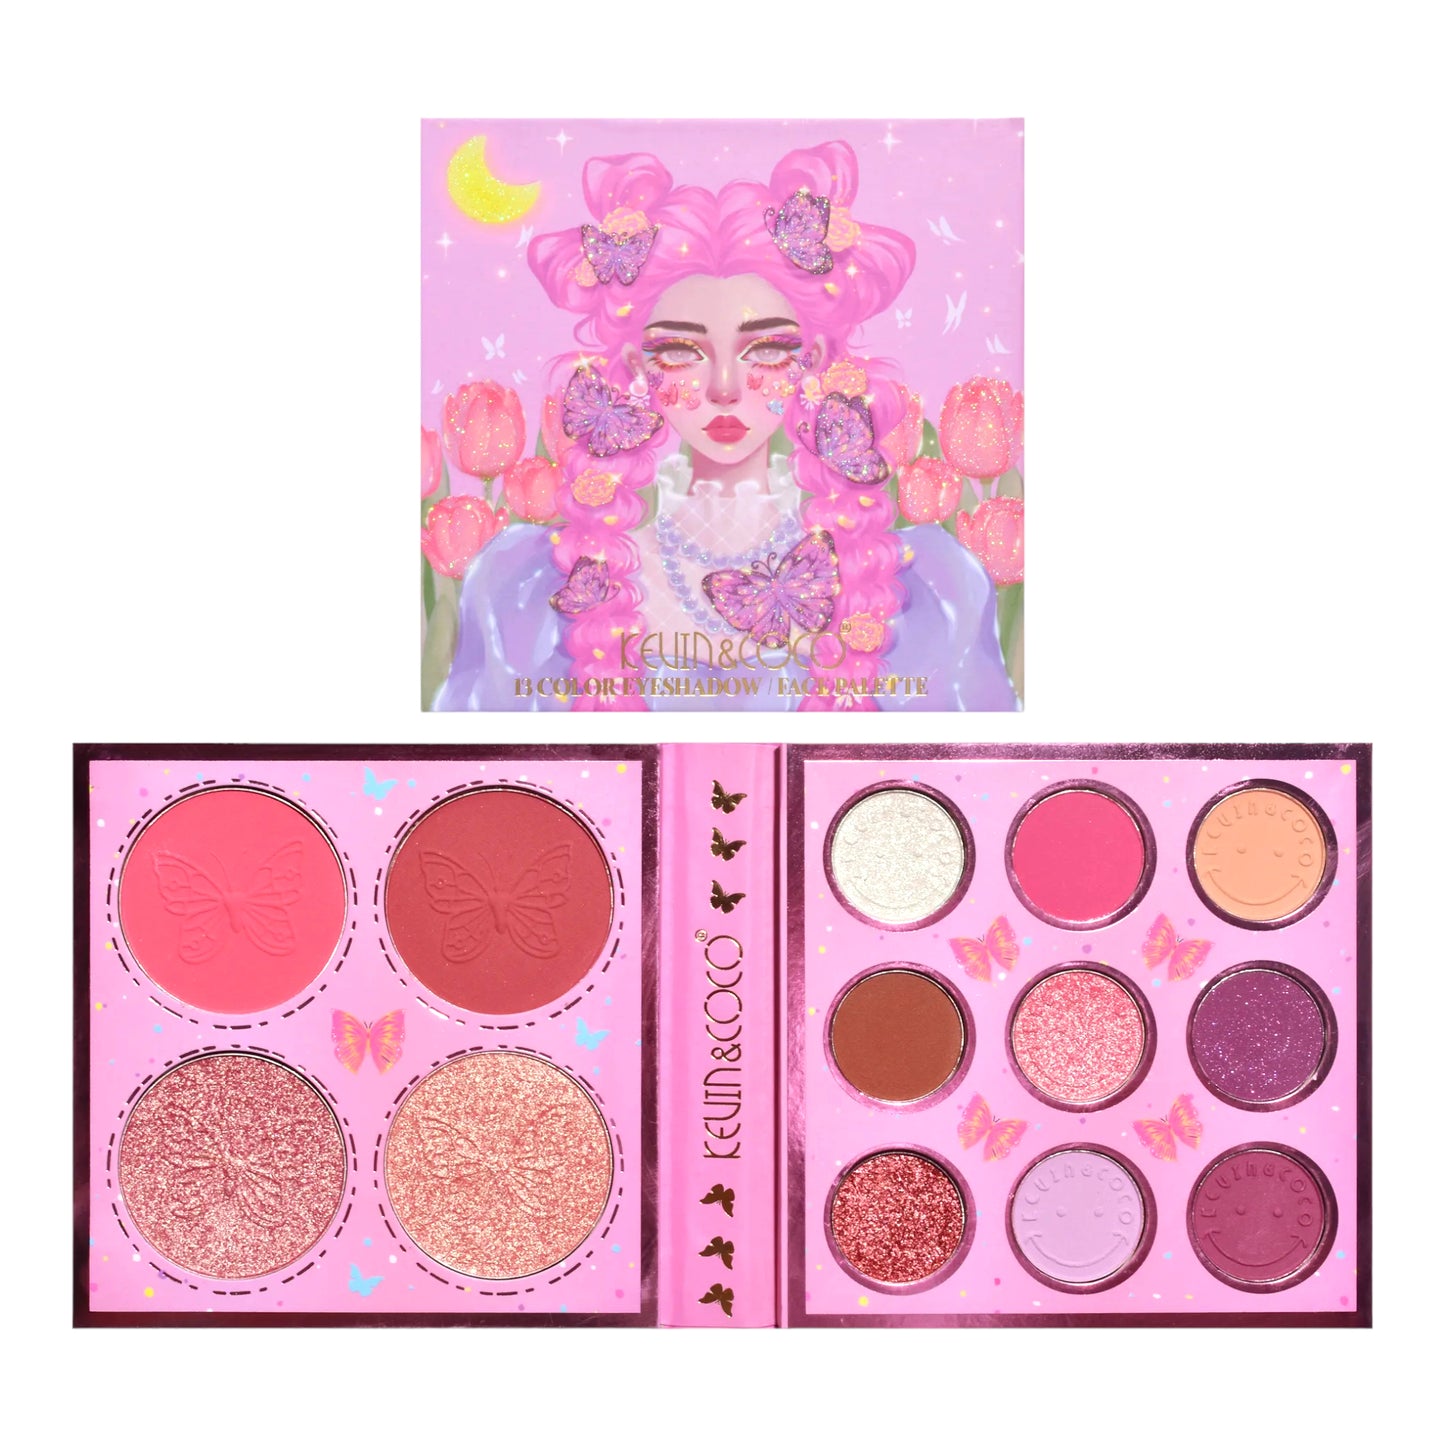 KEVIN&COCO BUTTERFLY HAIR 9 COLOR EYESHADOW PALETTE KC894448 R13